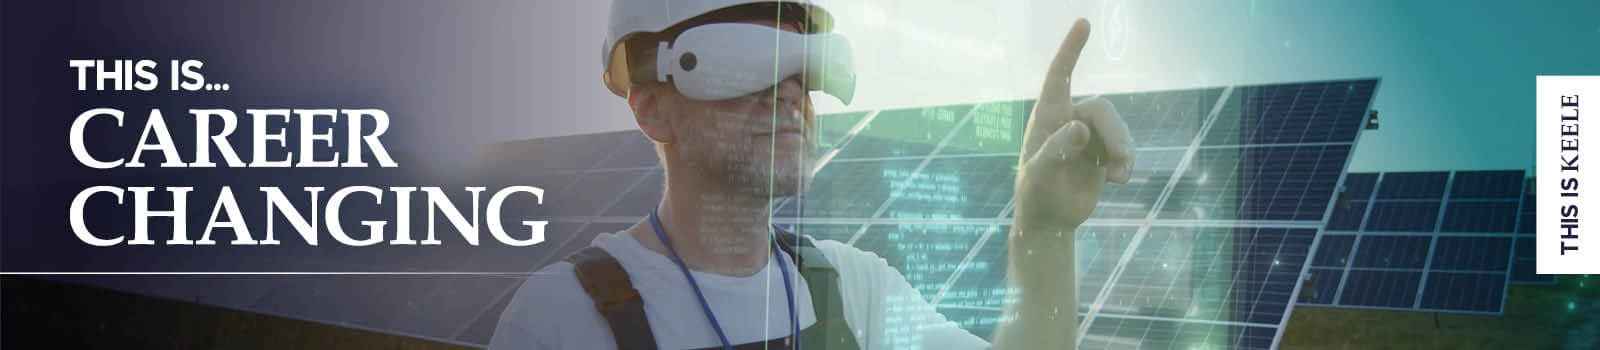 Male with AR headset viewing data, solar panels in the background